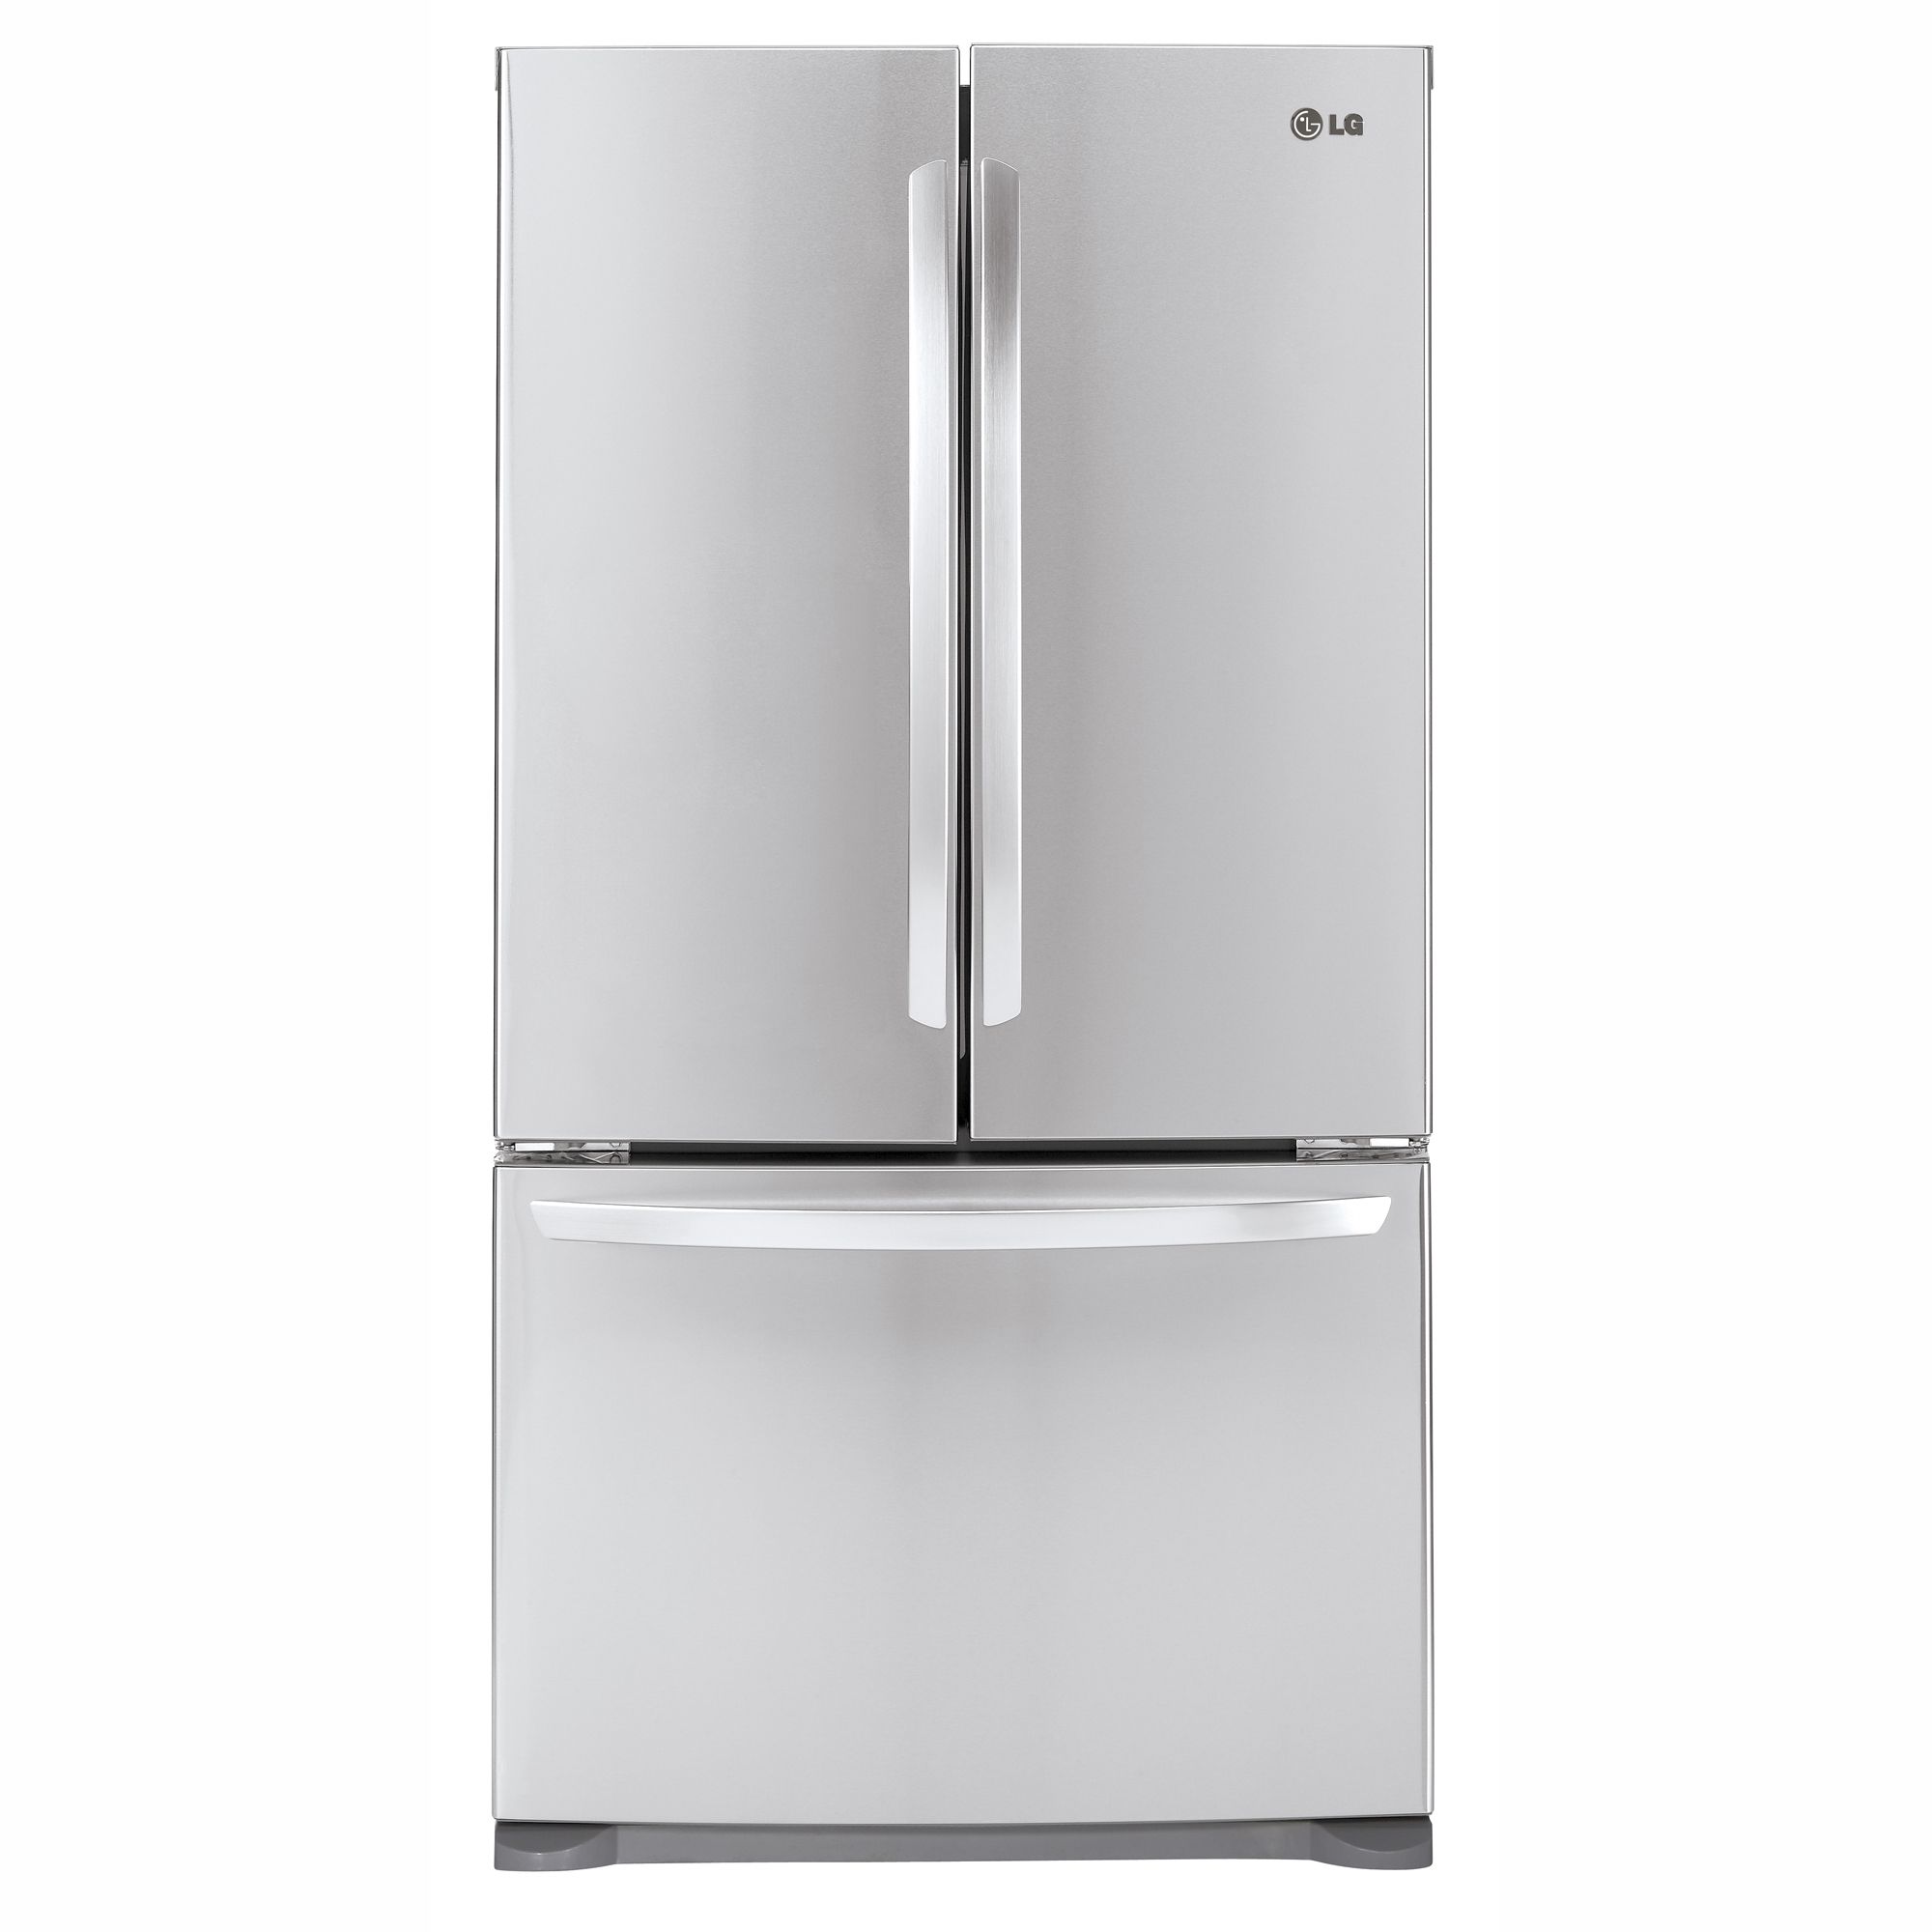 Lg Lfc21776st 21 Cu Ft French Door Counter Depth Refrigerator Stainless Steel Sears Outlet